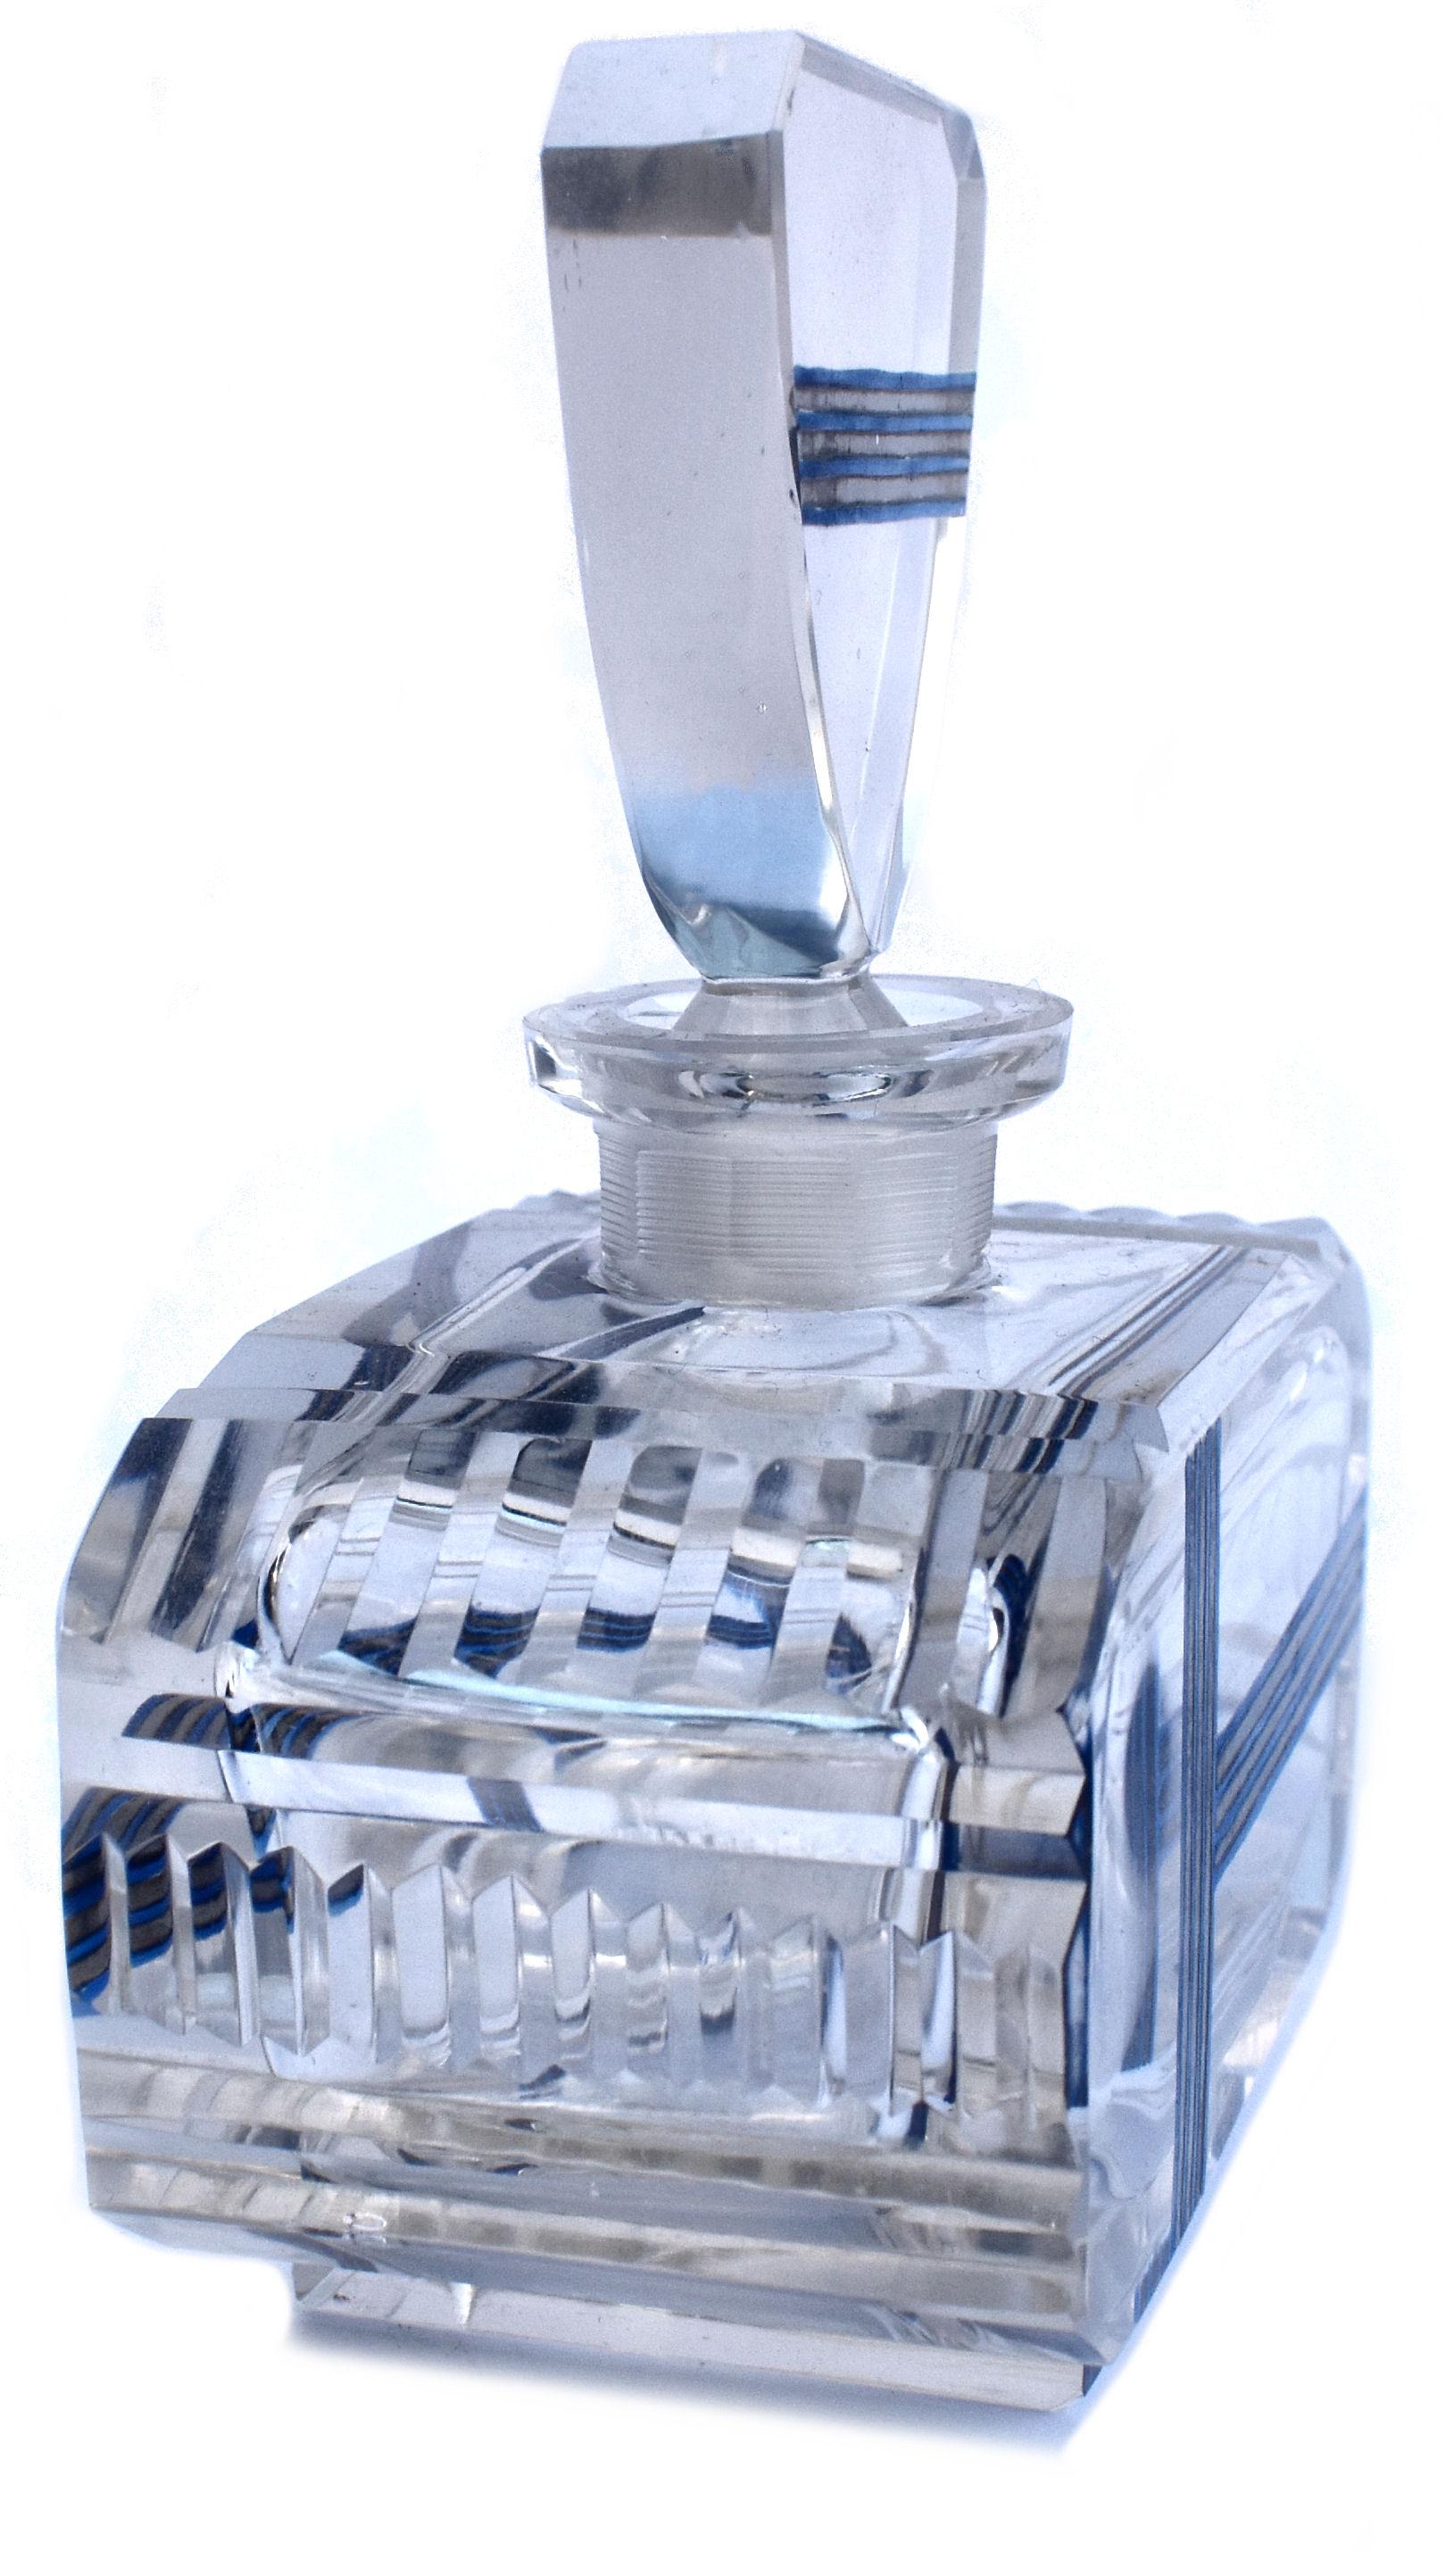 Art Deco large cut glass perfume scent bottle, dating to the 1930's and originating from France. In vivid blue glass with silver enamelled geometric design. Glass cut glass stopper. Just a tiny residue of perfume inside the base. Overall the